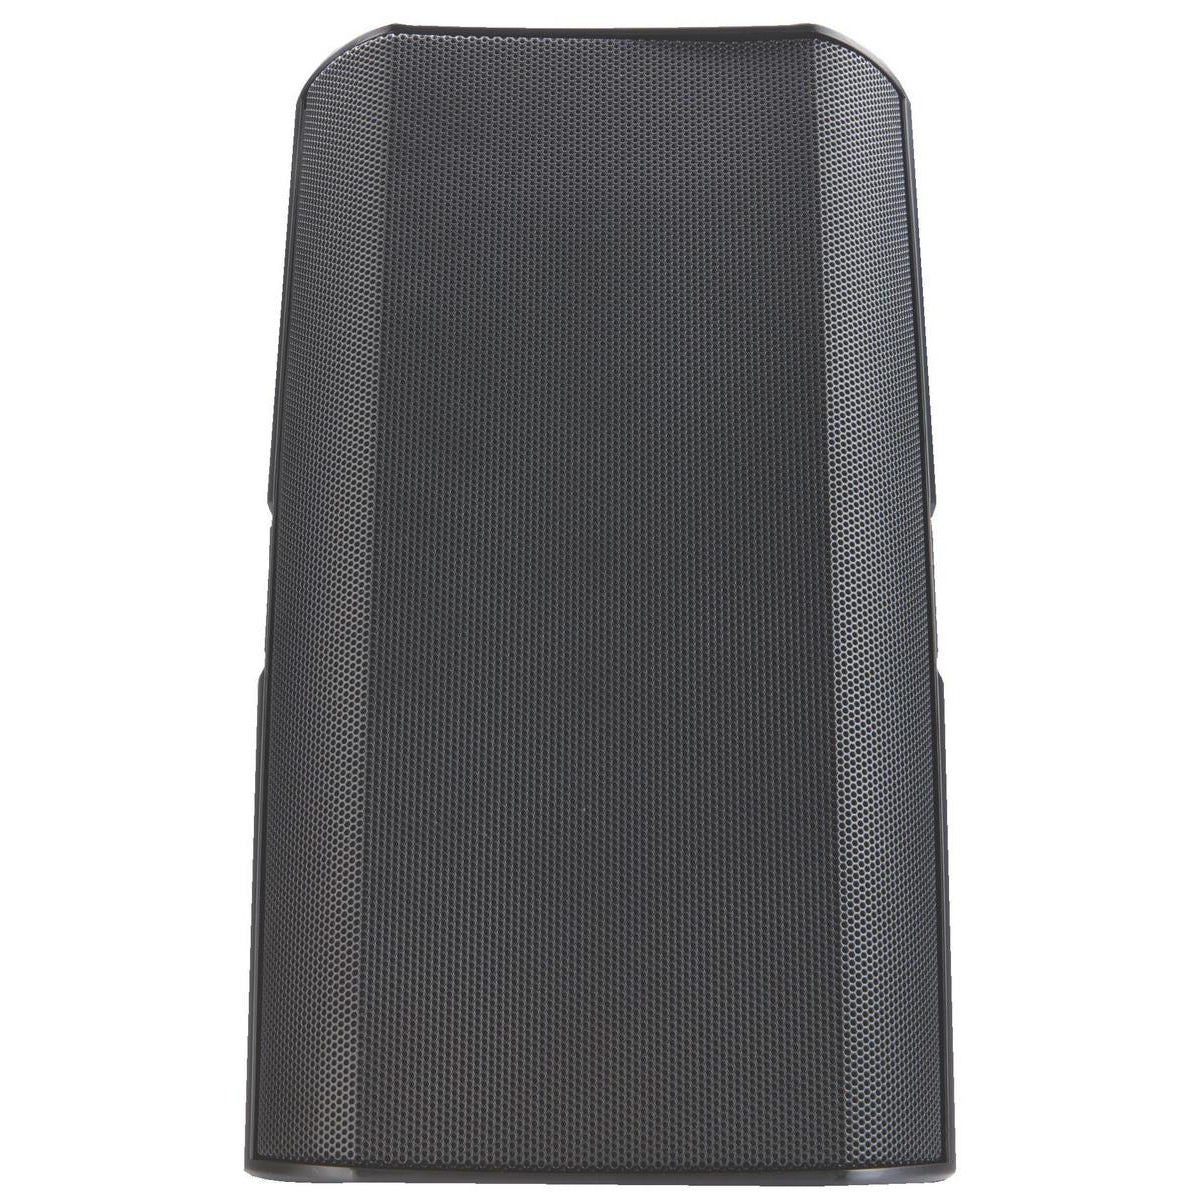 QSC AD-S8T-BK-TD AcousticDesign Series 8" 2-Way 200W Surface-Mount Loudspeaker